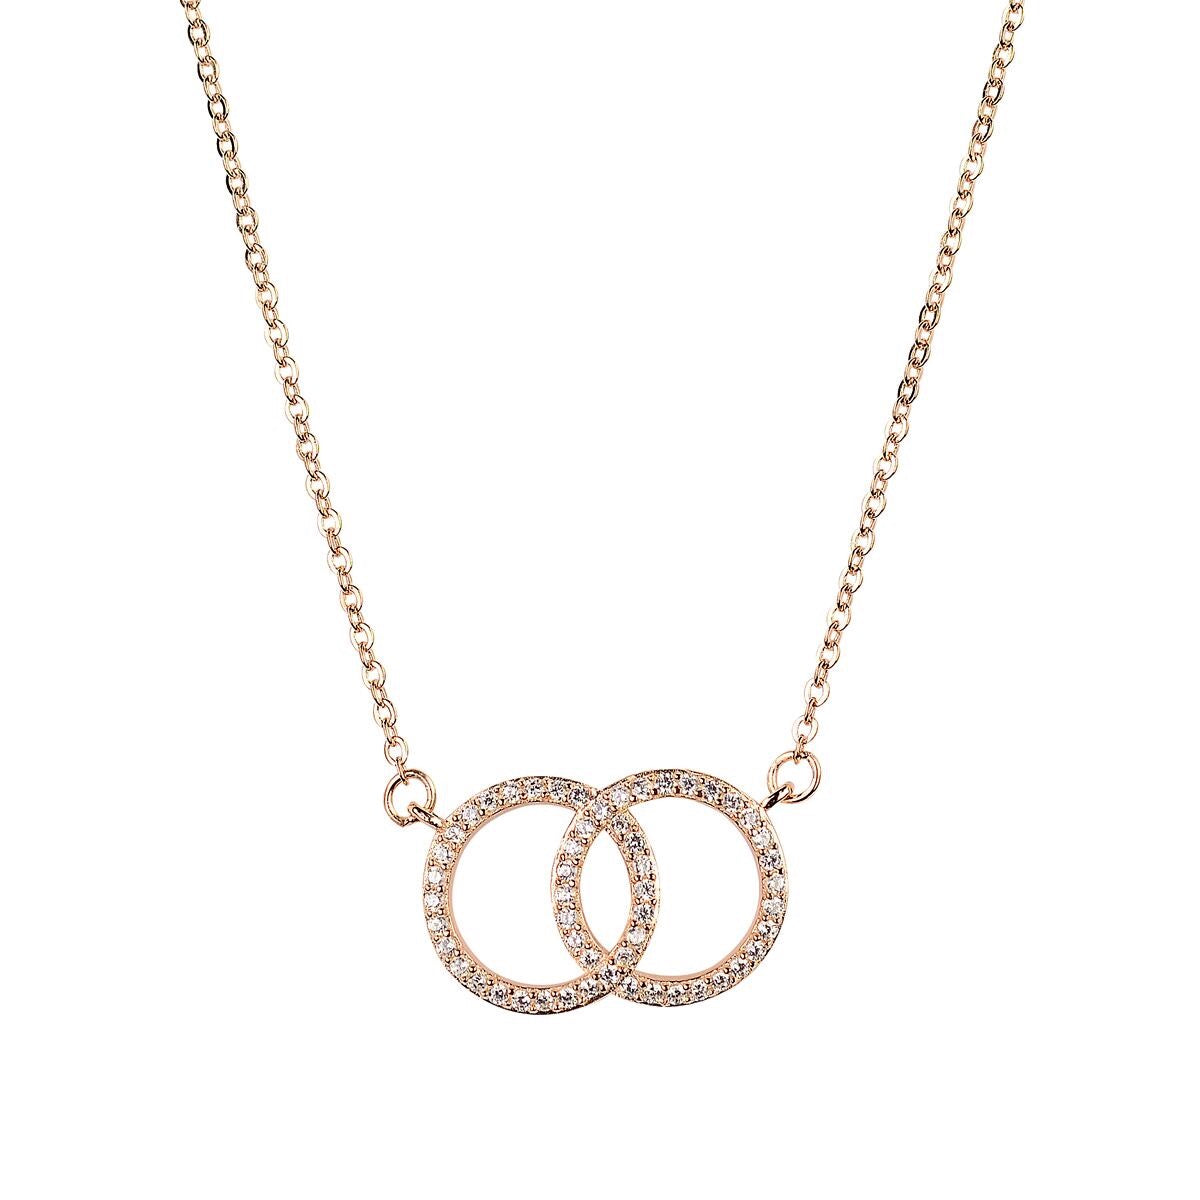 ETERNITY ROSE GOLD NECKLACE